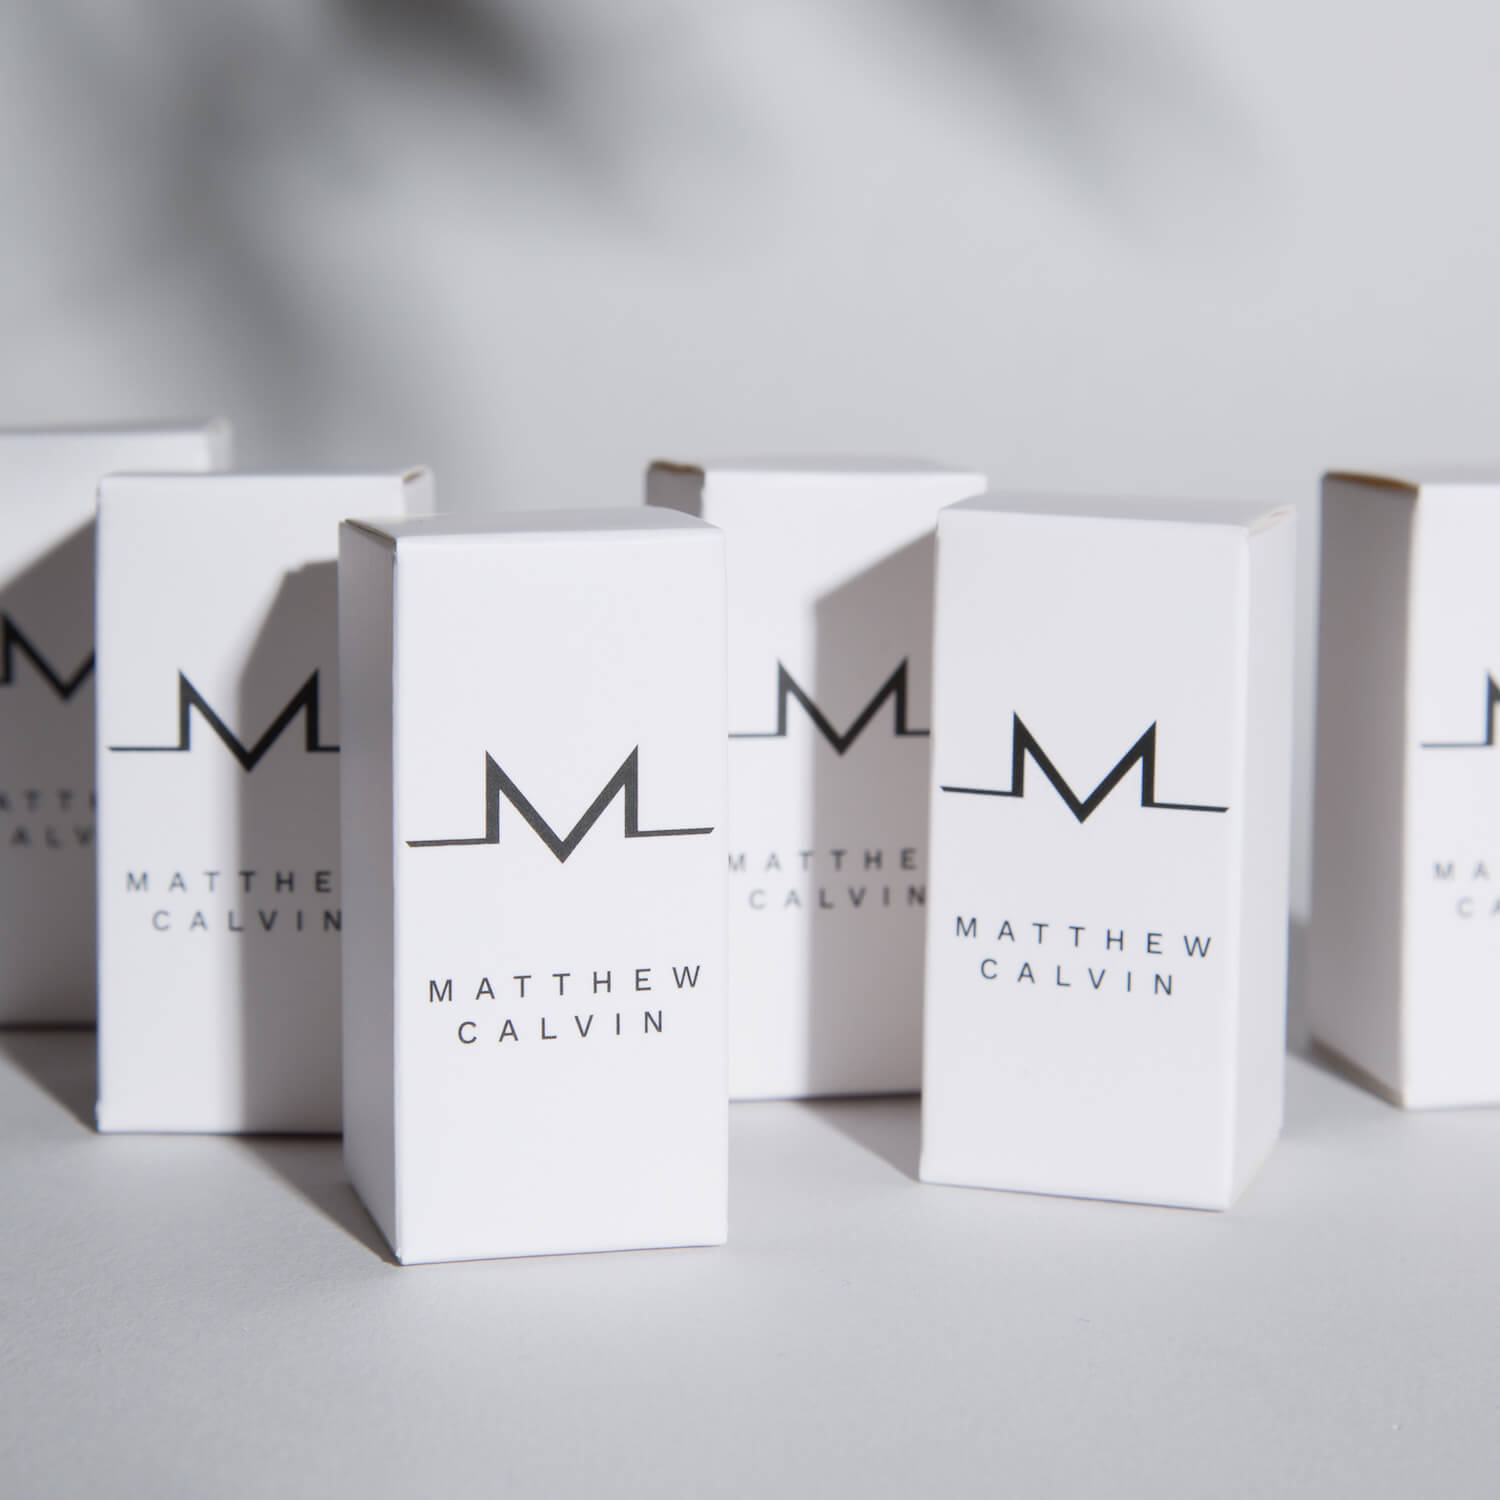 Group of white jewellery boxes for earrings with Matthew Calvin logo on them